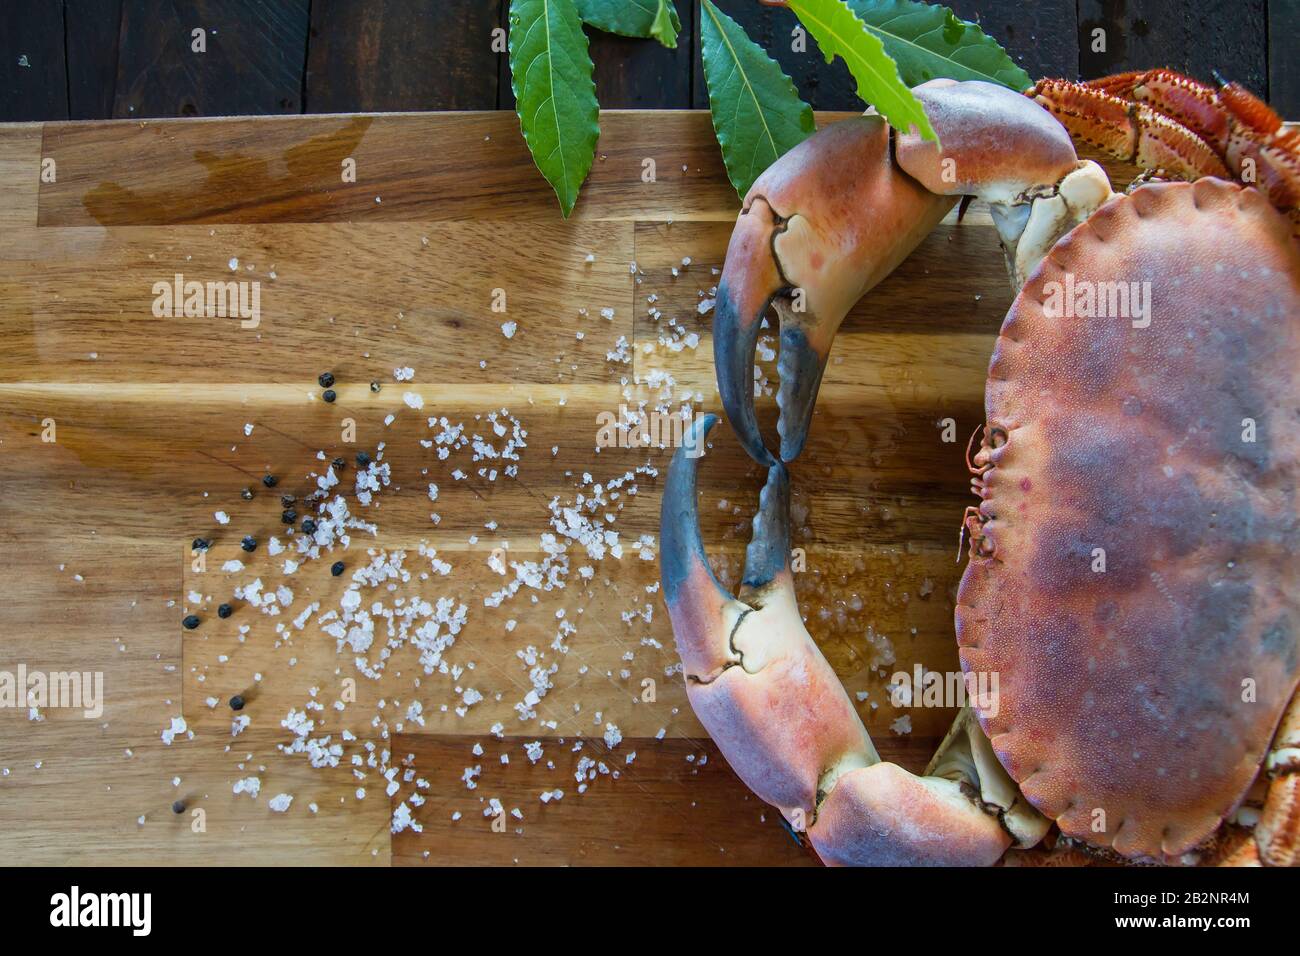 Fresh edible brown crab on the wooden kitchen board, cooking delicious seafood Stock Photo